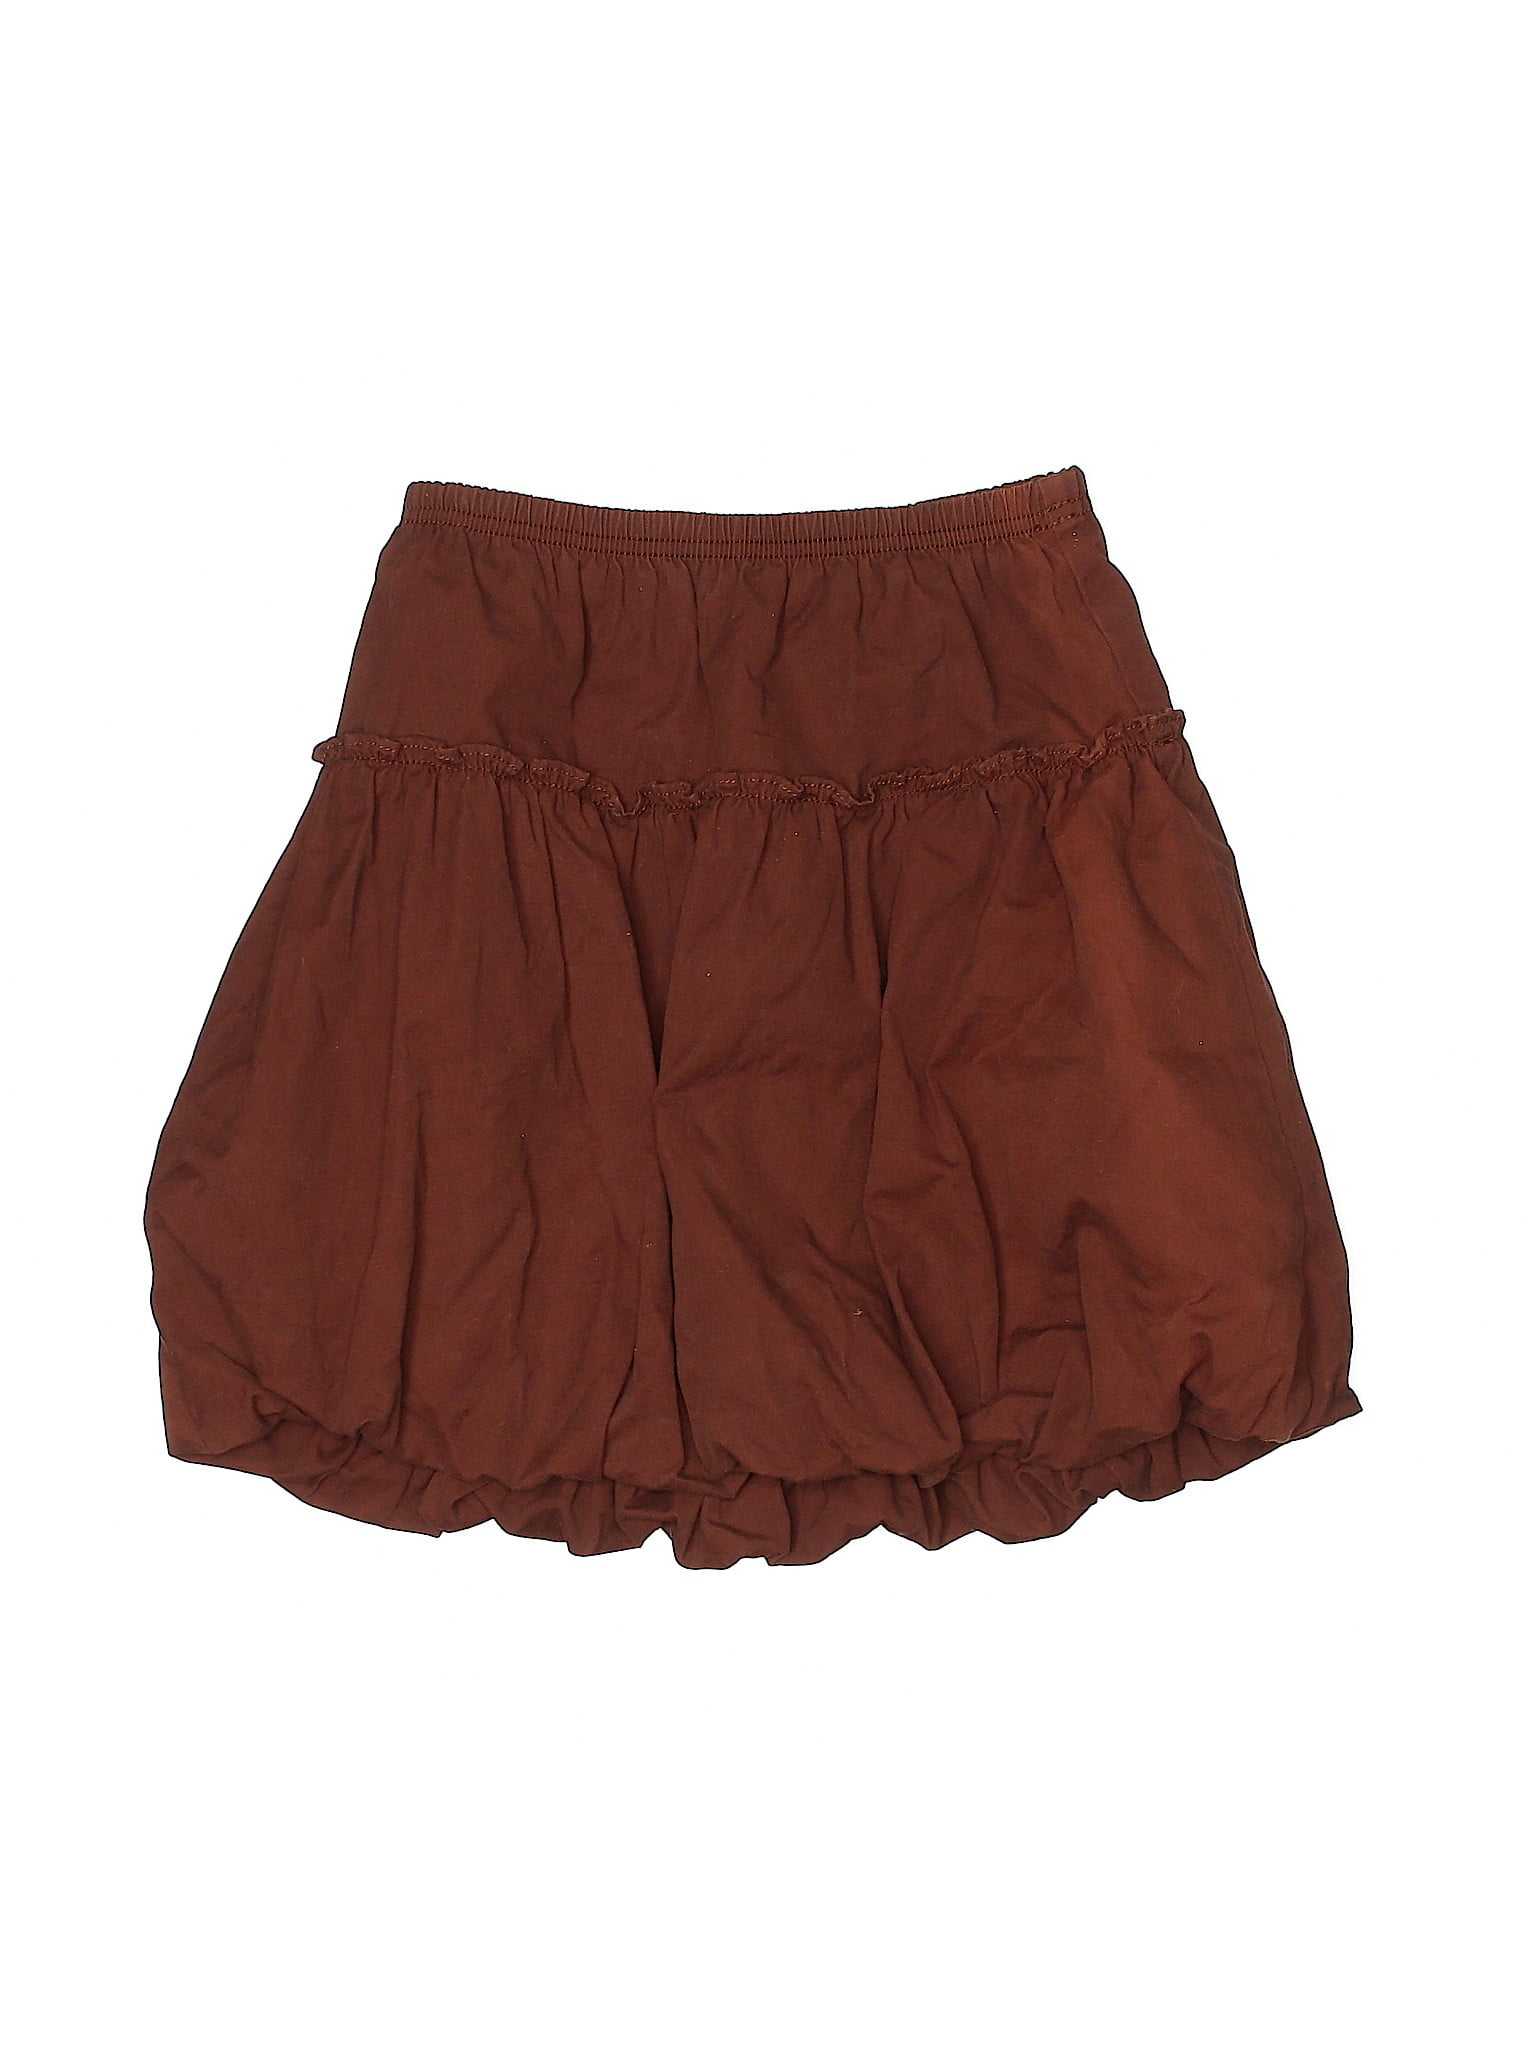 Hanna Andersson - Pre-Owned Hanna Andersson Girl's Size 140 Skirt ...